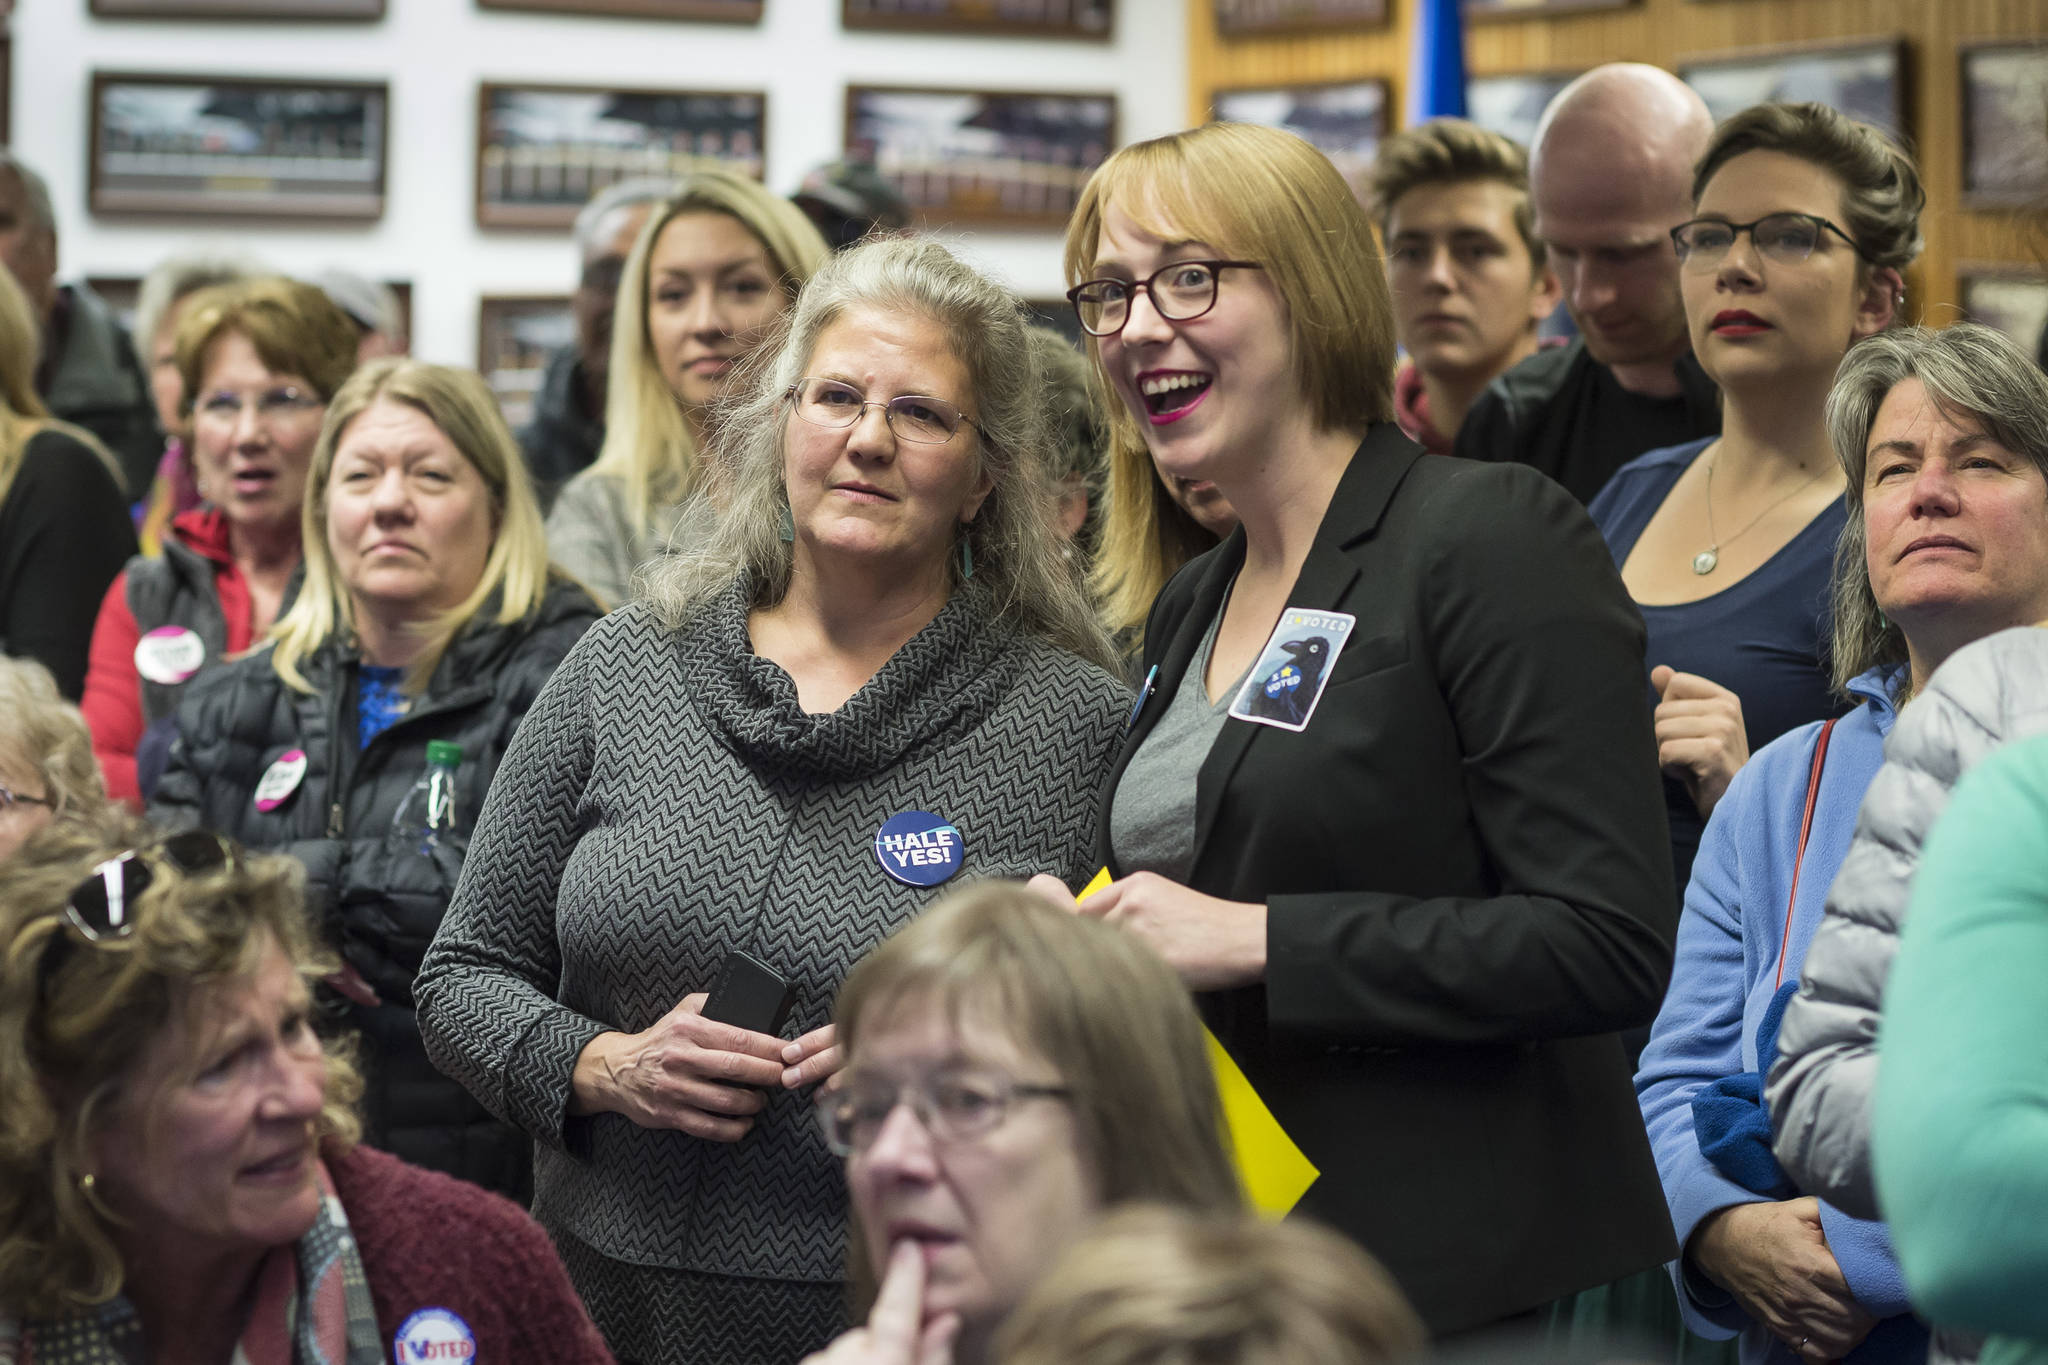 Assembly District 2 candidate Michelle Bonnet Hale, left center, and Assembly Areawide candidate Carole Triem watch their numbers soar as they watch Election results come in at the Assembly chambers on Tuesday, Oct. 2, 2018. (Michael Penn | Juneau Empire)